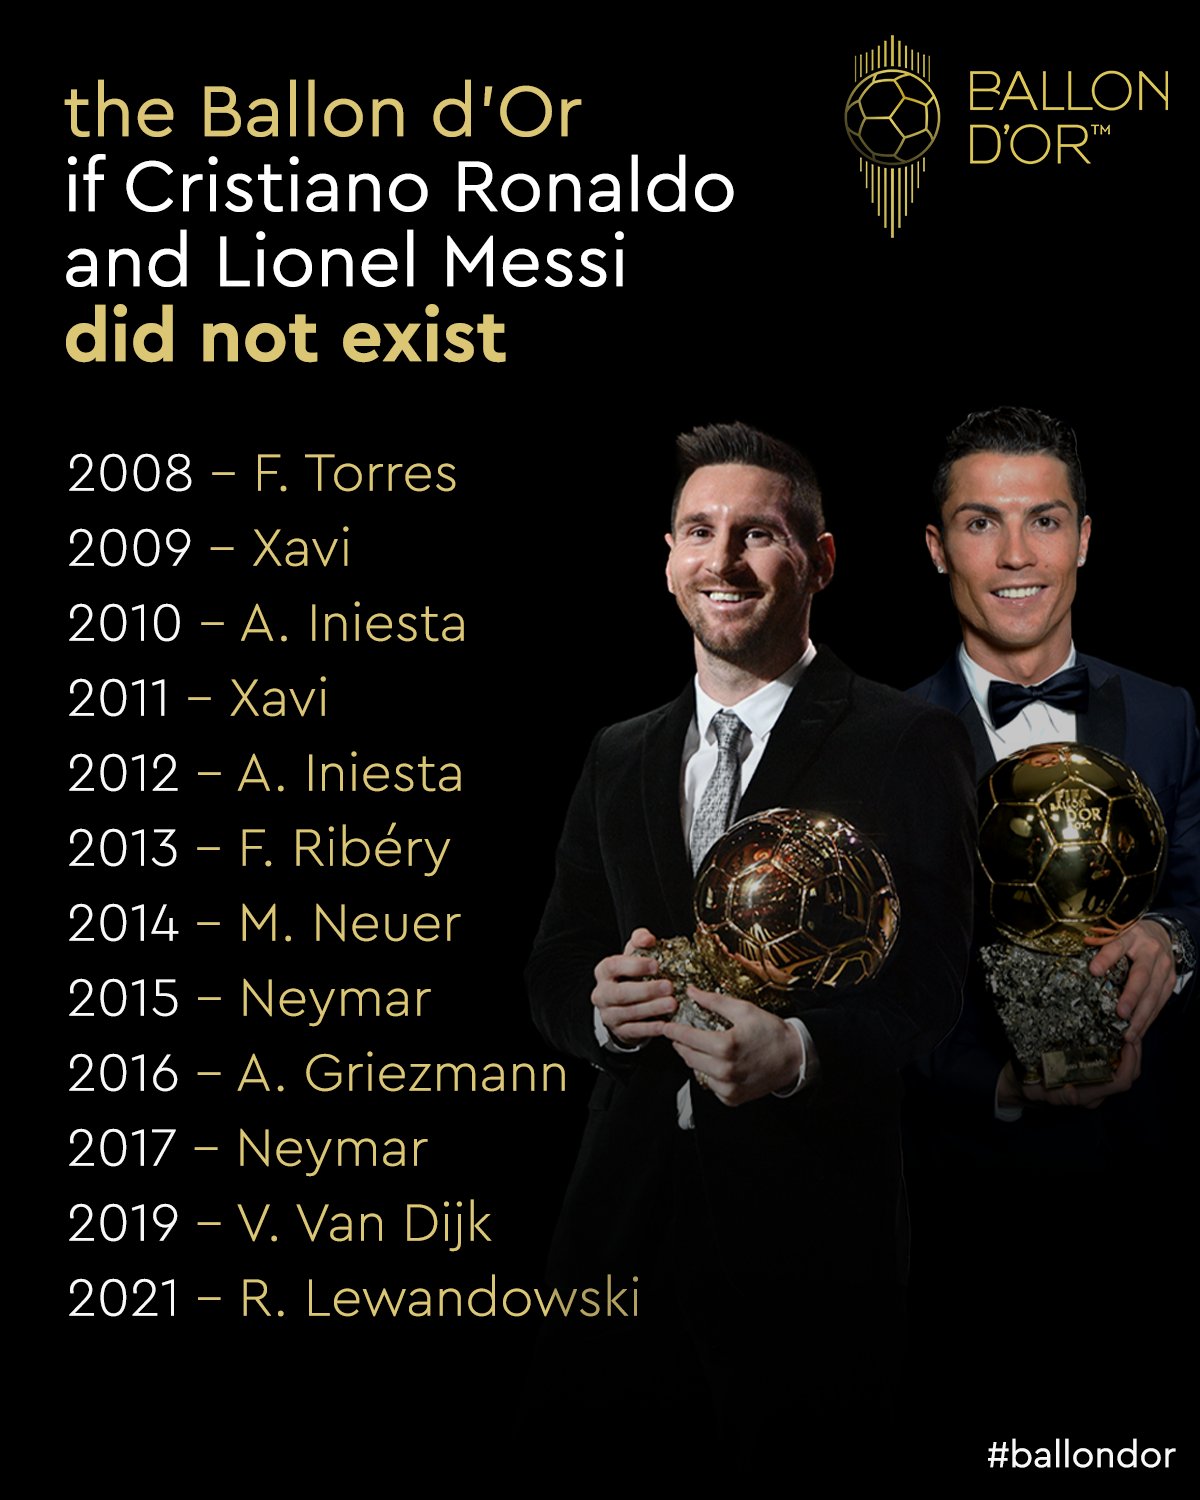 Ballon d'Or on X: The Ballon d'Or if Cristiano Ronaldo and Lionel Messi  did not exist 😳 #ballondor  / X